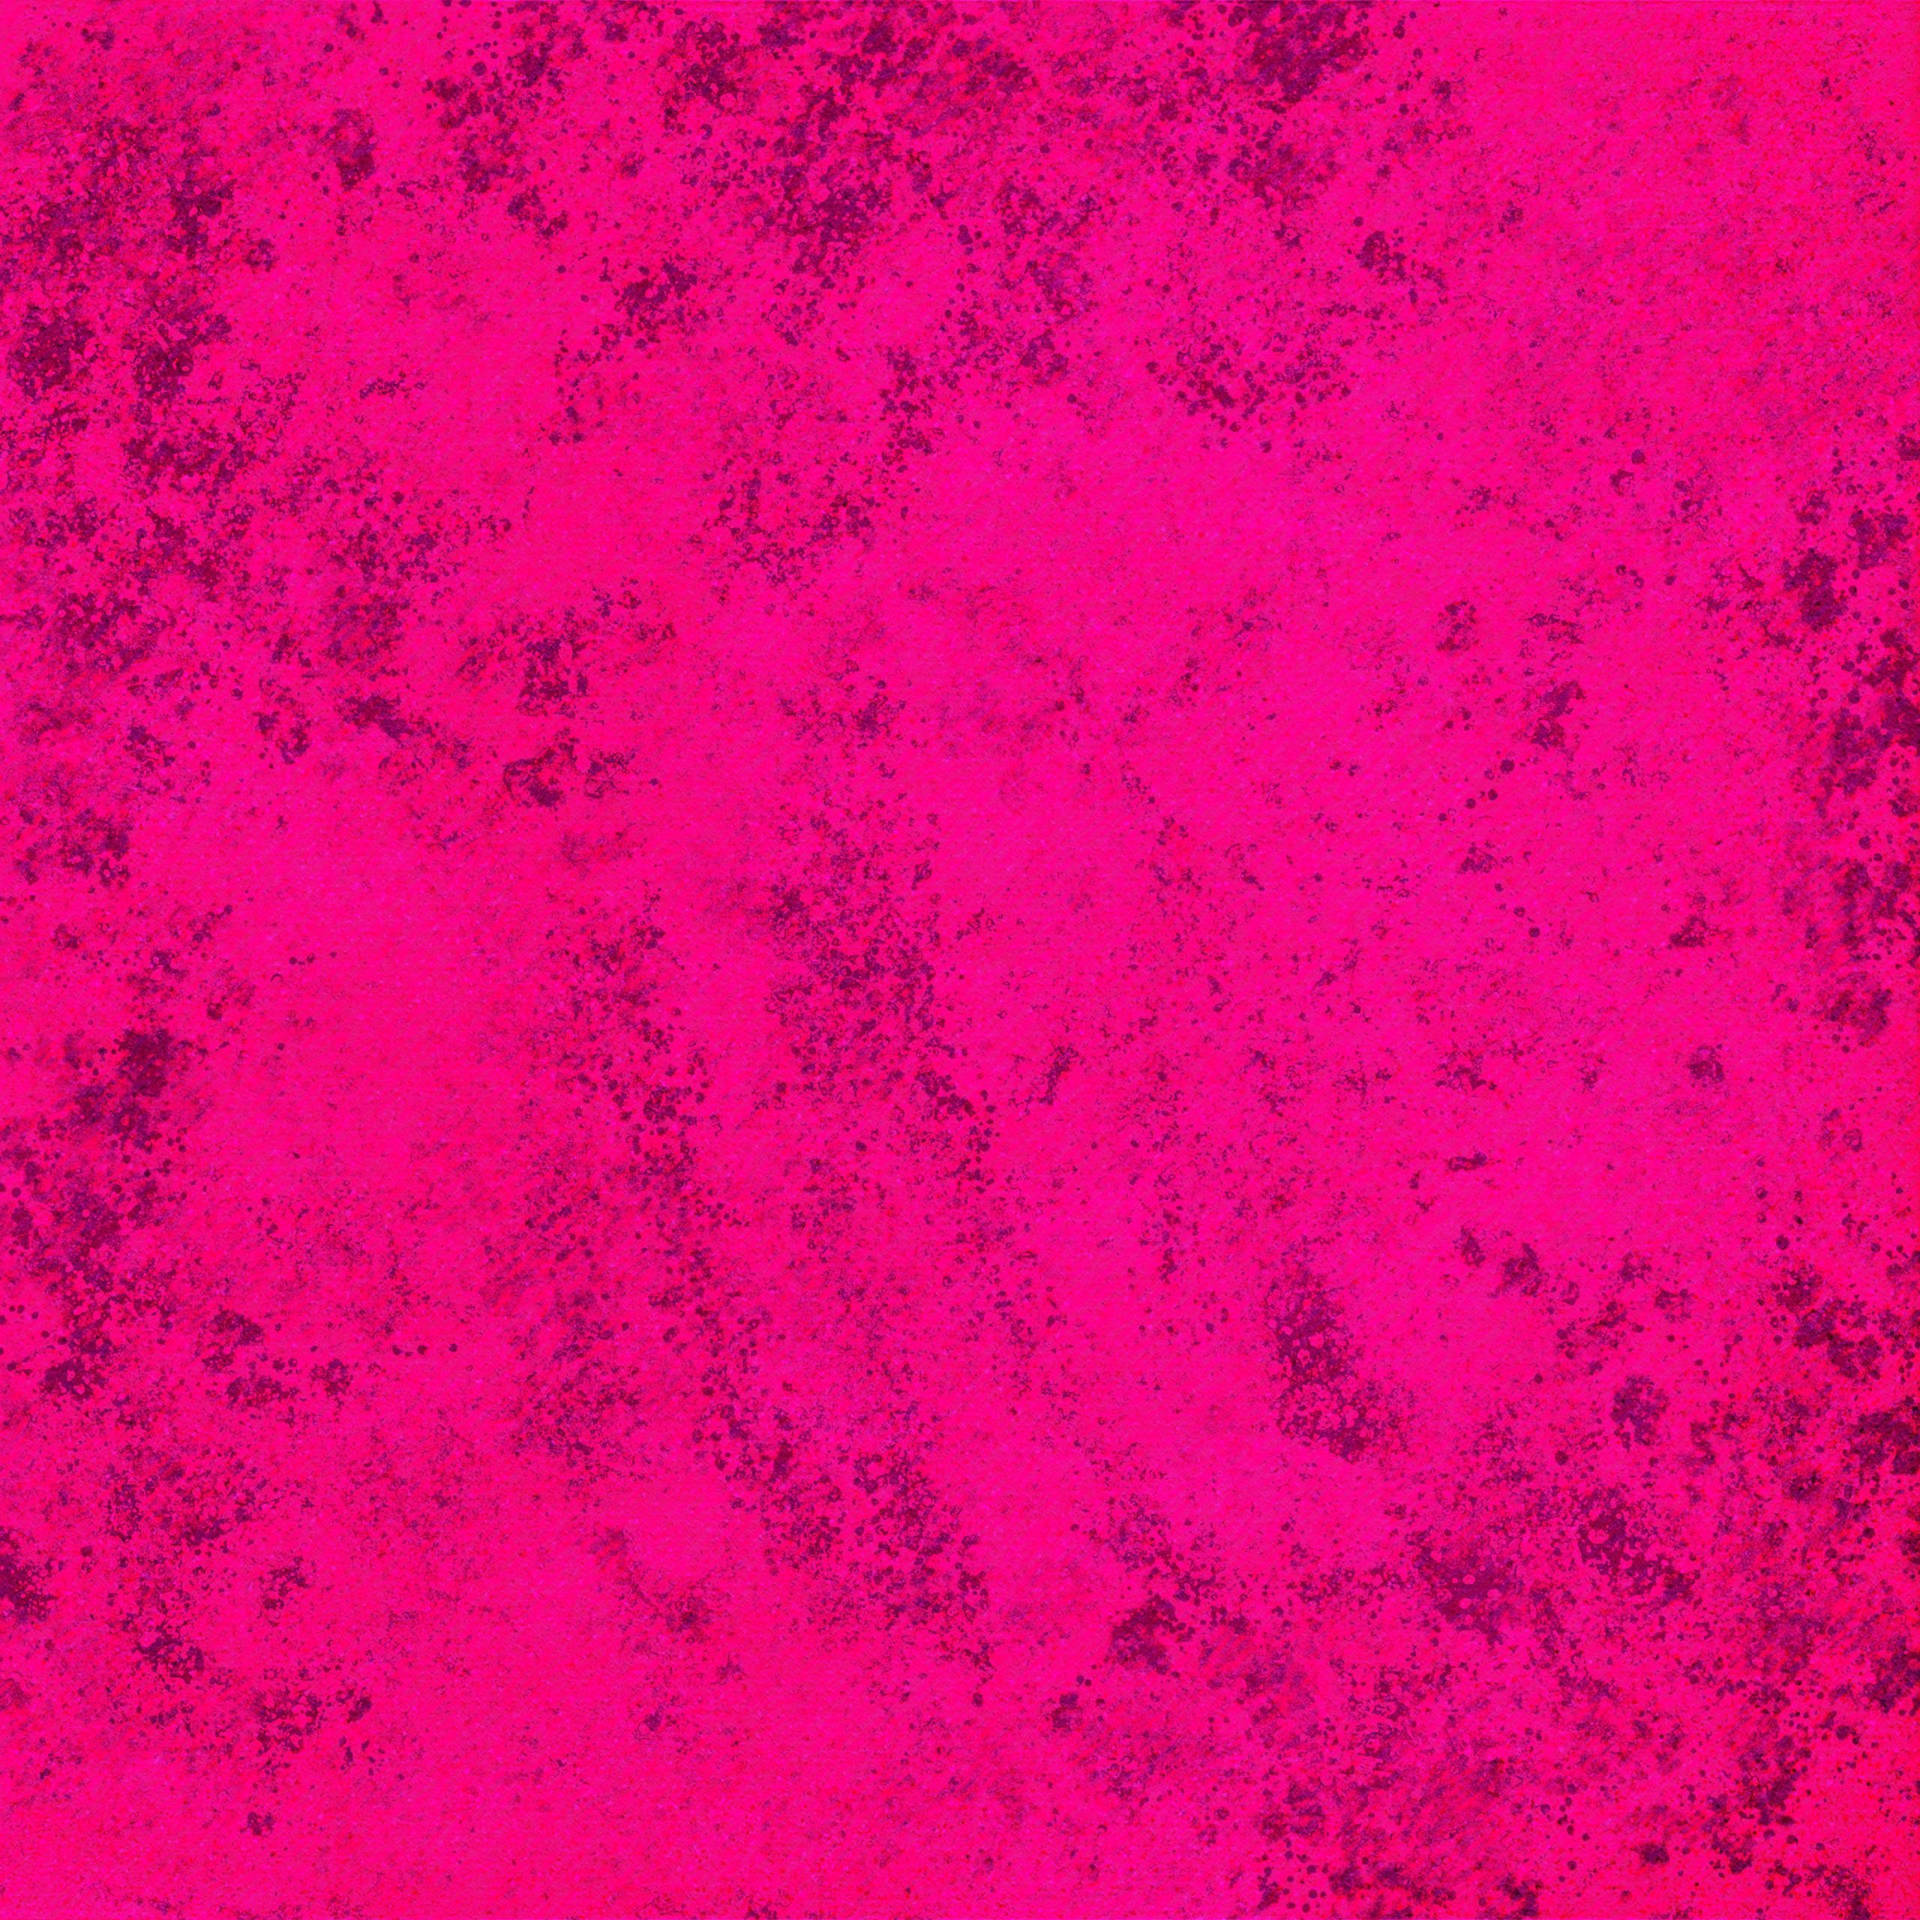 Textured Hot Pink Aesthetic Background